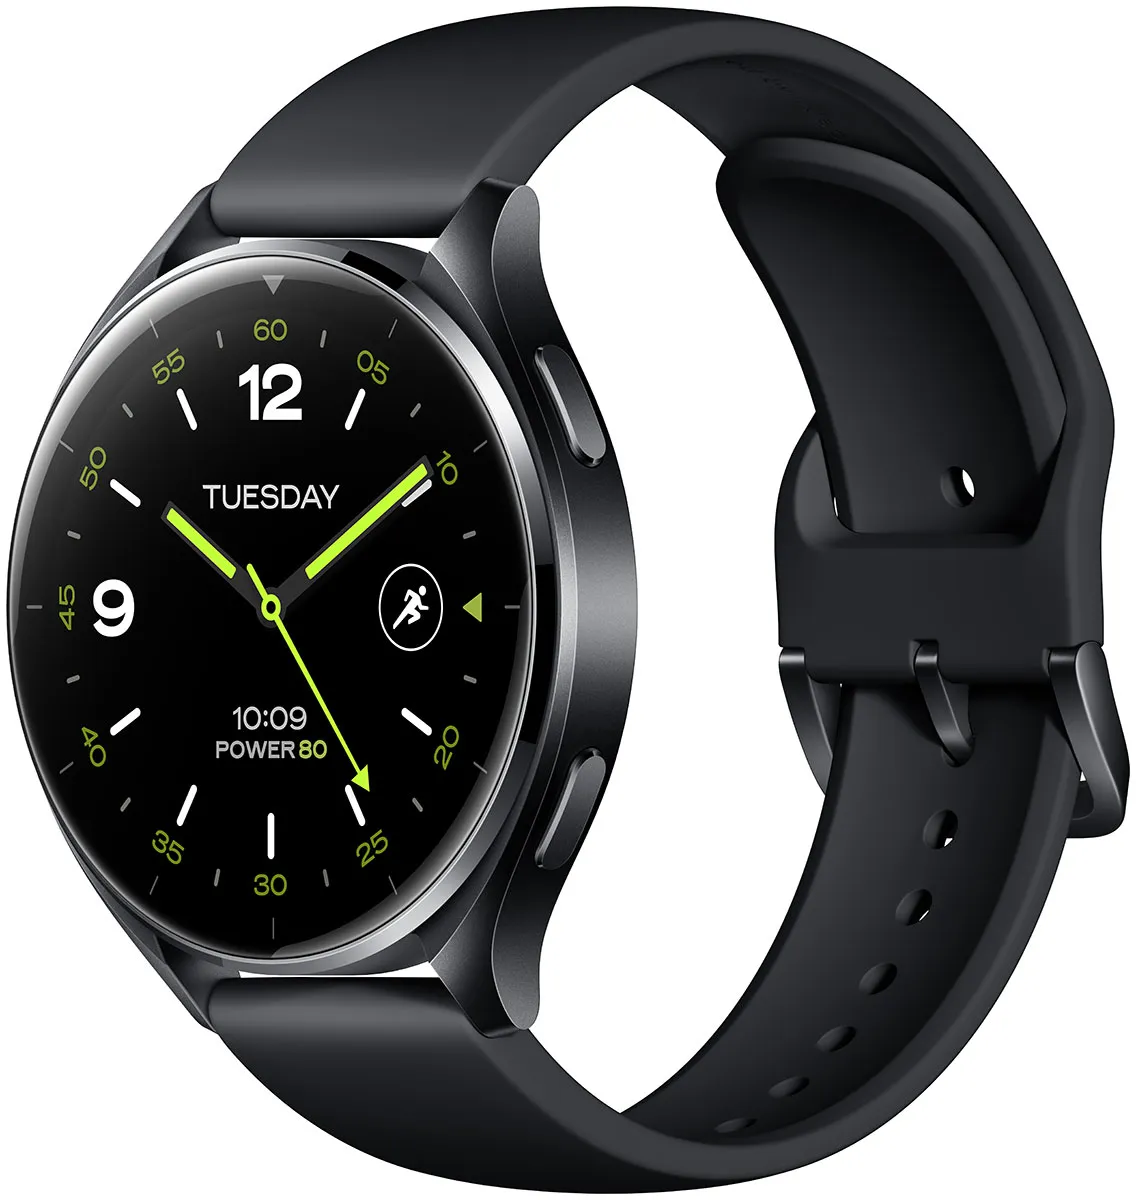 Details of new Xiaomi smartwatch surface as cheaper Galaxy Watch6 and Pixel Watch 2 rival